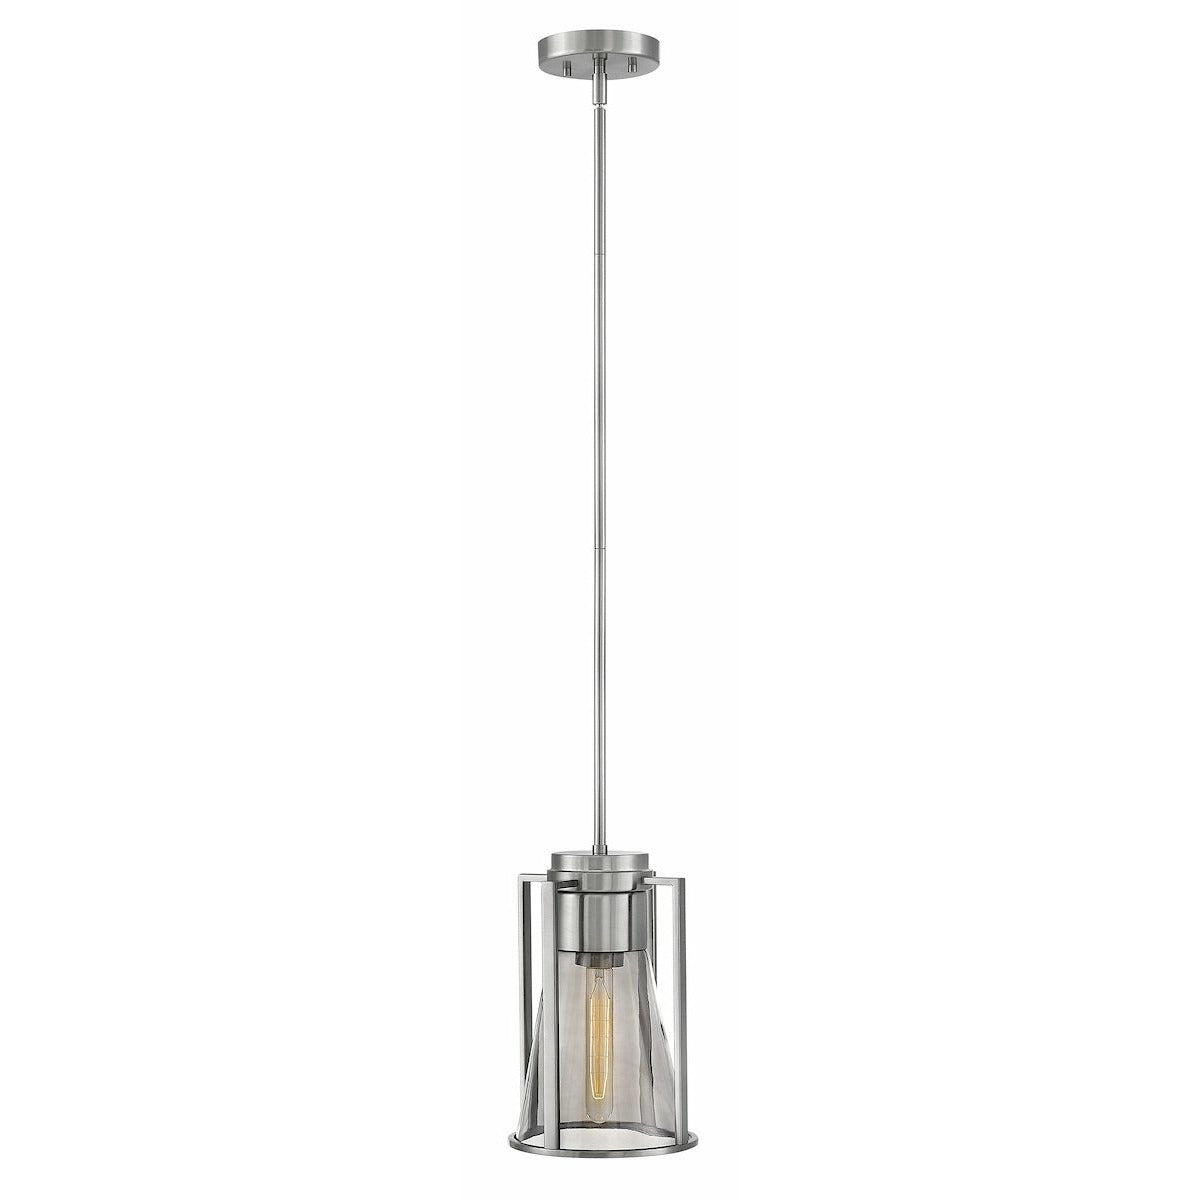 Refinery Pendant Brushed Nickel with Smoked glass